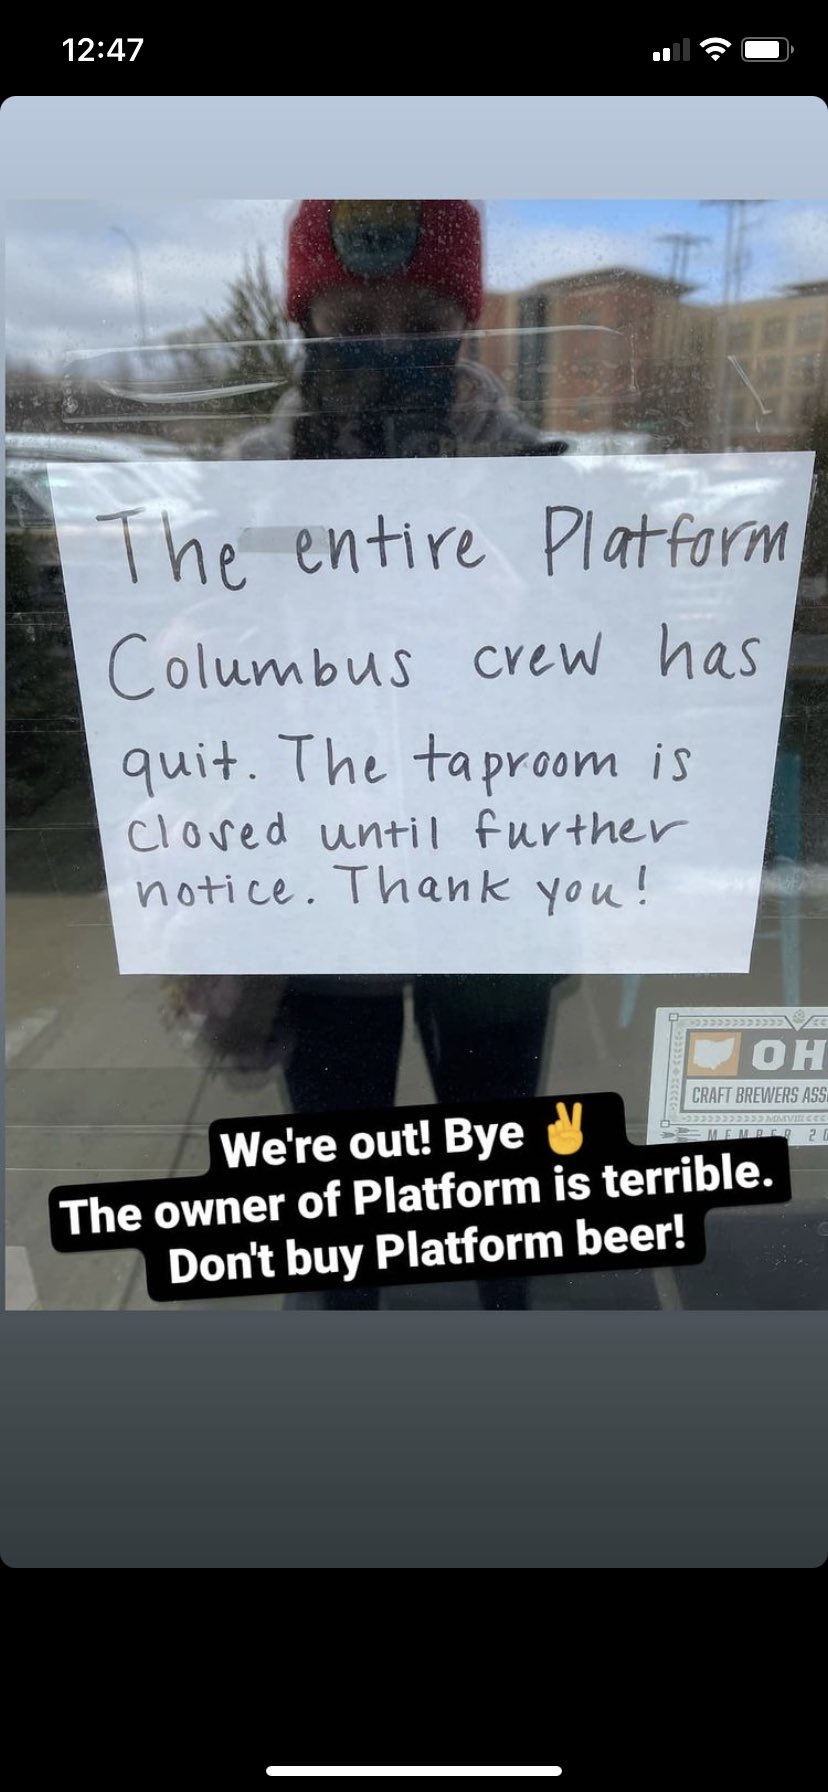 Walk Off The Platform and Beer Pirates